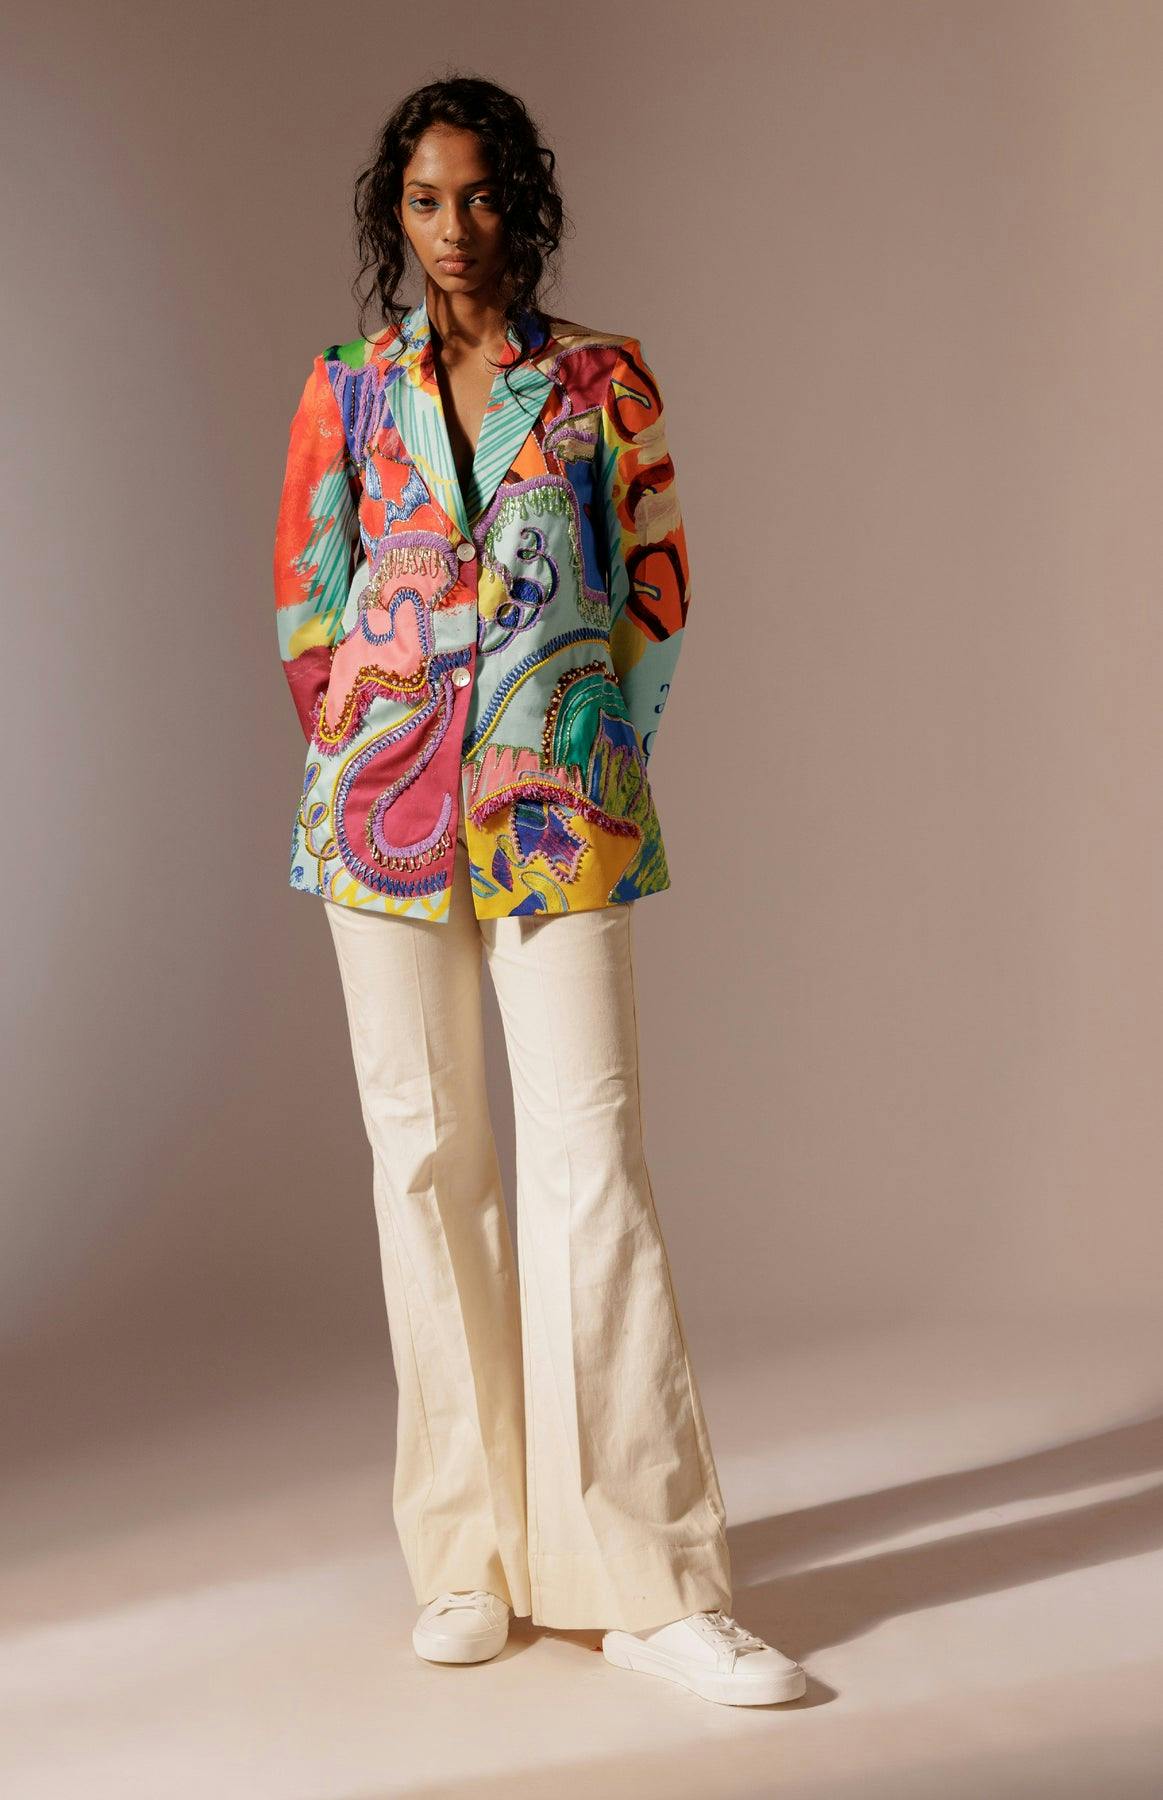 Island Embroidered Blazer Set, a product by Advait India